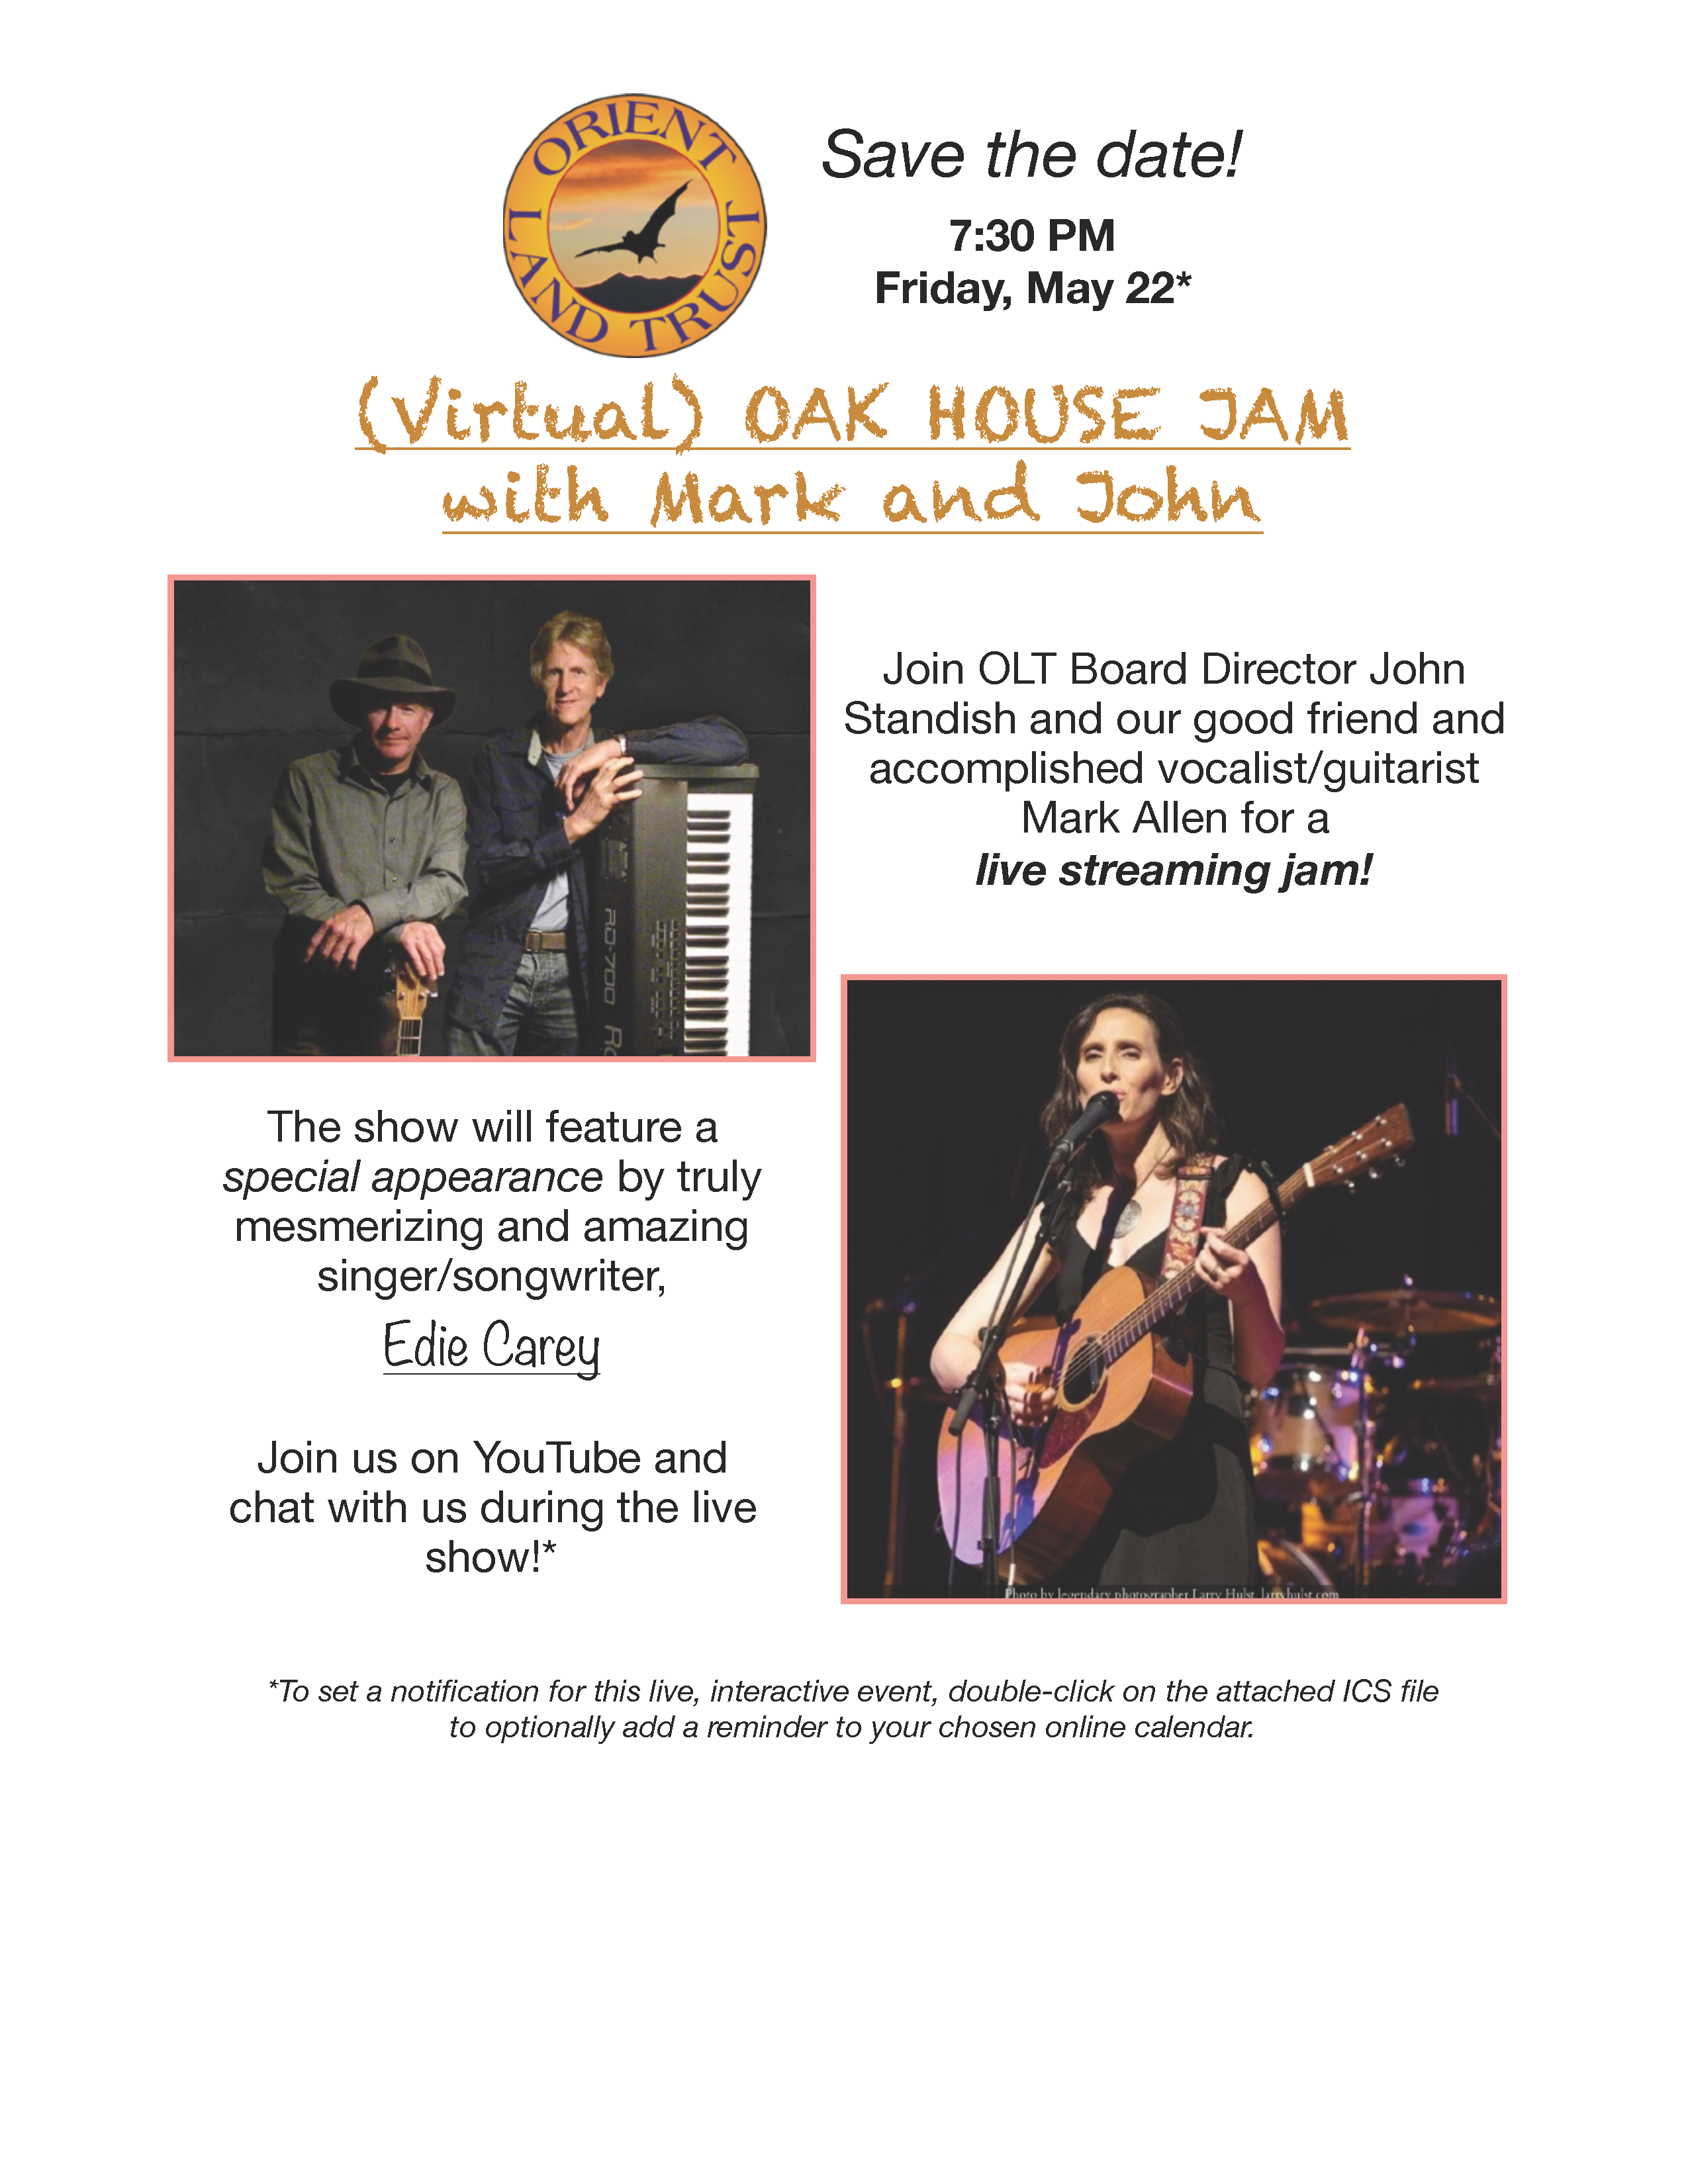 7:30 PM  Friday, May 22:   (Virtual) OAK HOUSE JAM with Mark and John.  Join OLT Board Director John Standish and our good friend and accomplished vocalist/guitarist Mark Allen for a live streaming jam!   The show will feature a special appearance by truly mesmerizing and amazing singer/songwriter, Edie Carey.    Join us on YouTube and chat with us during the live show! 